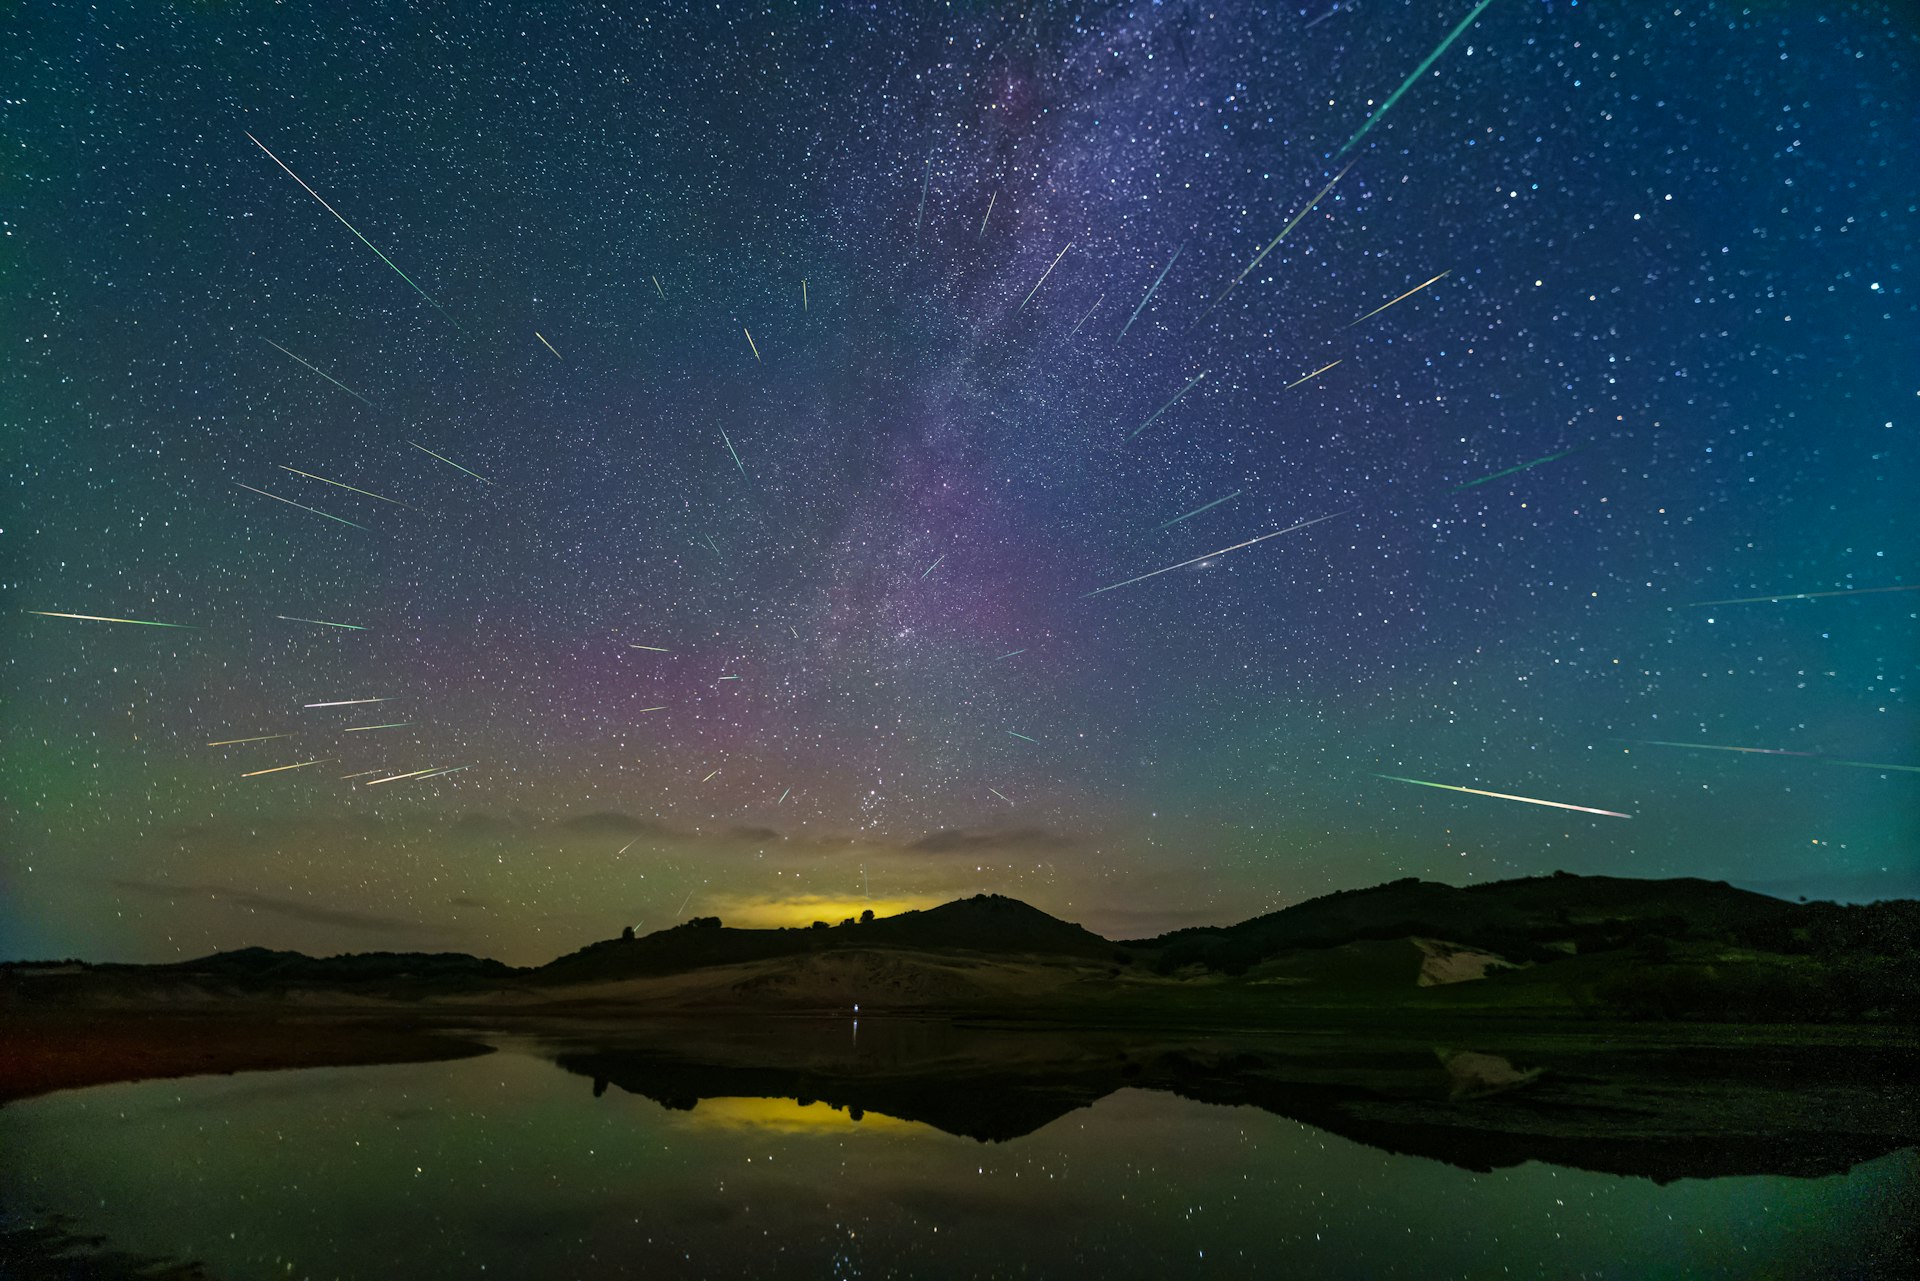 The Perseid meteor shower as seen from Chifeng, Inner Mongolia, China